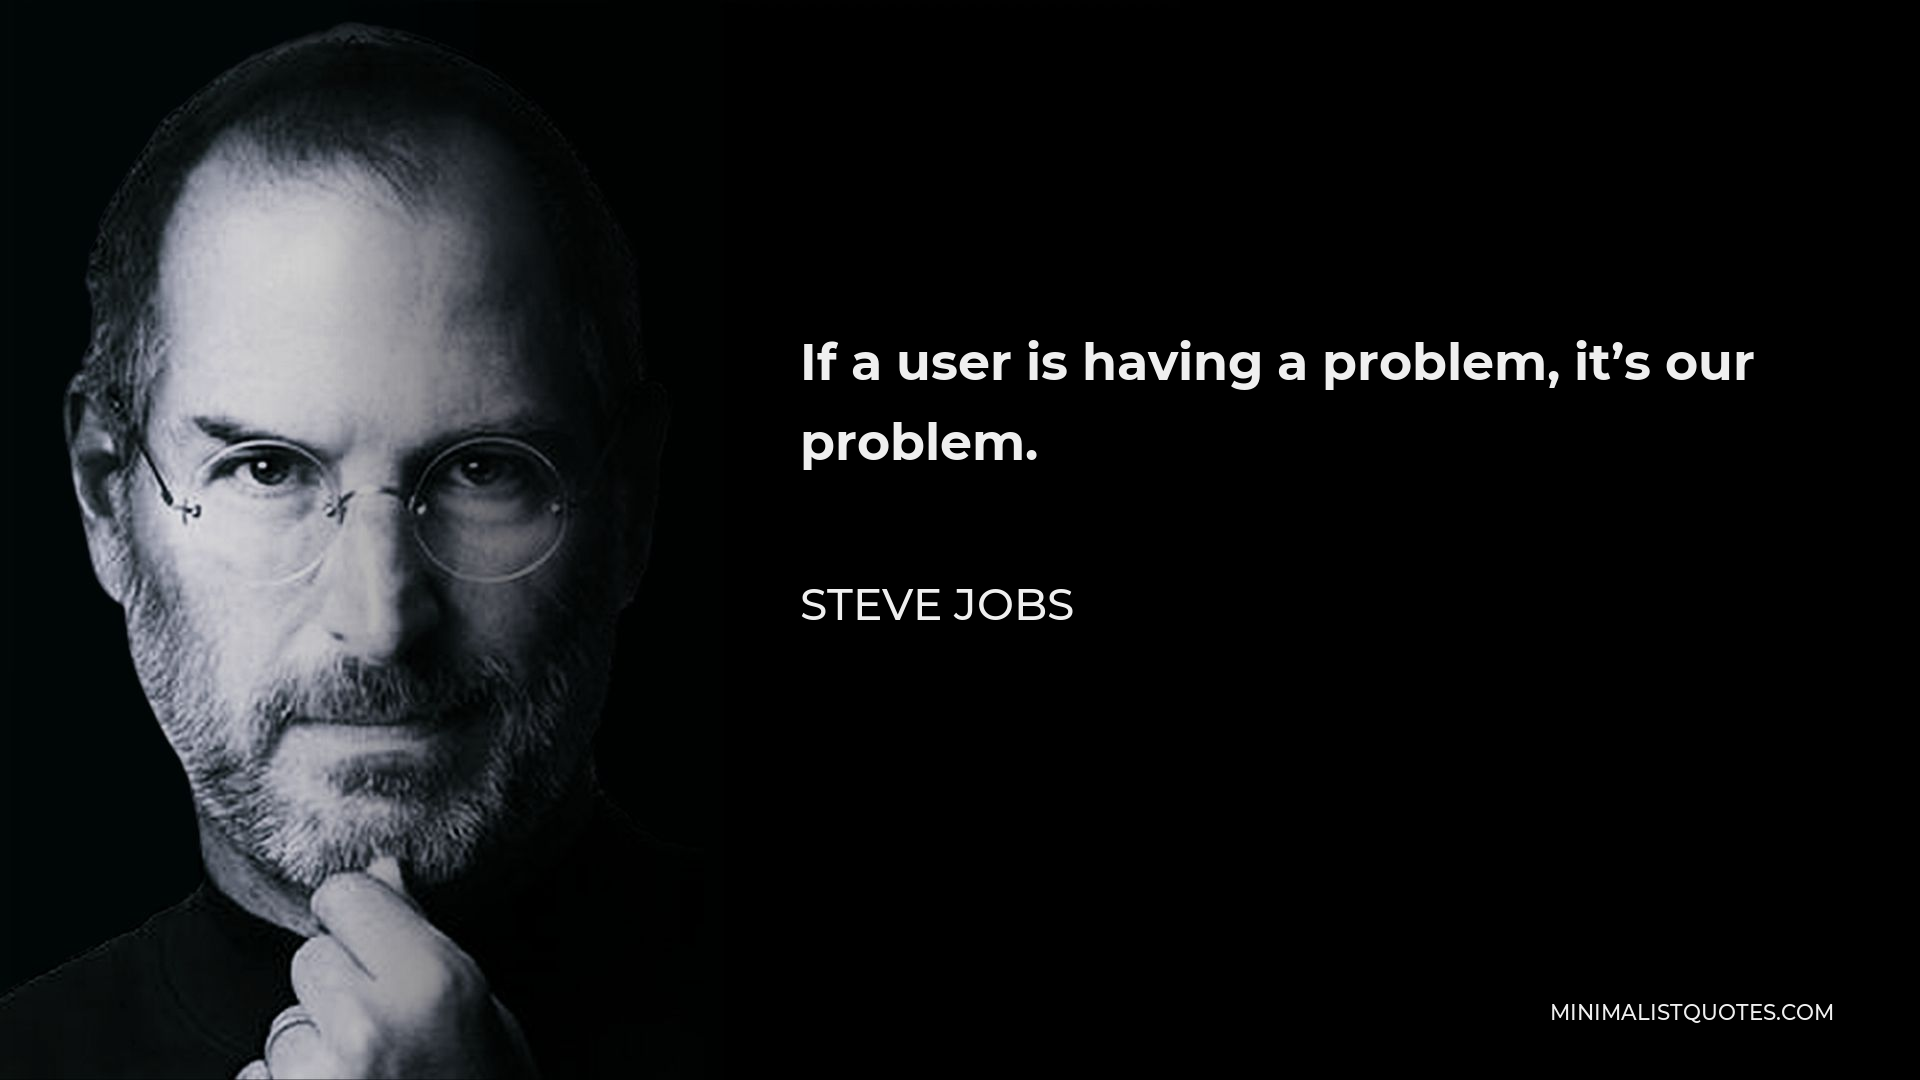 Steve Jobs Quote - If a user is having a problem, it’s our problem.